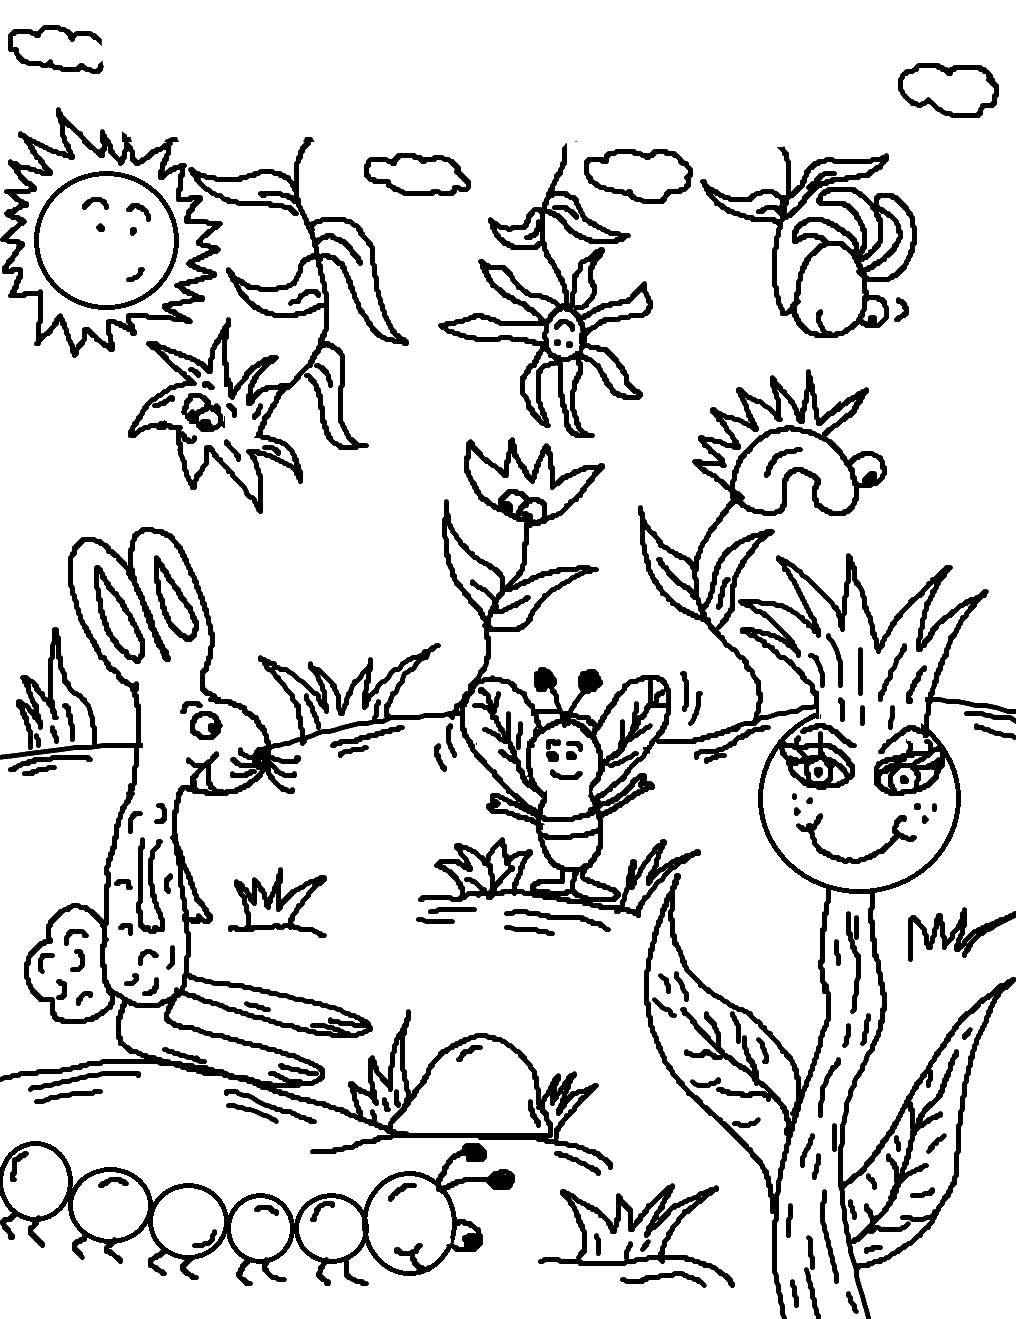 Coloring Forest animals. Category spring. Tags:  hare, rabbit.